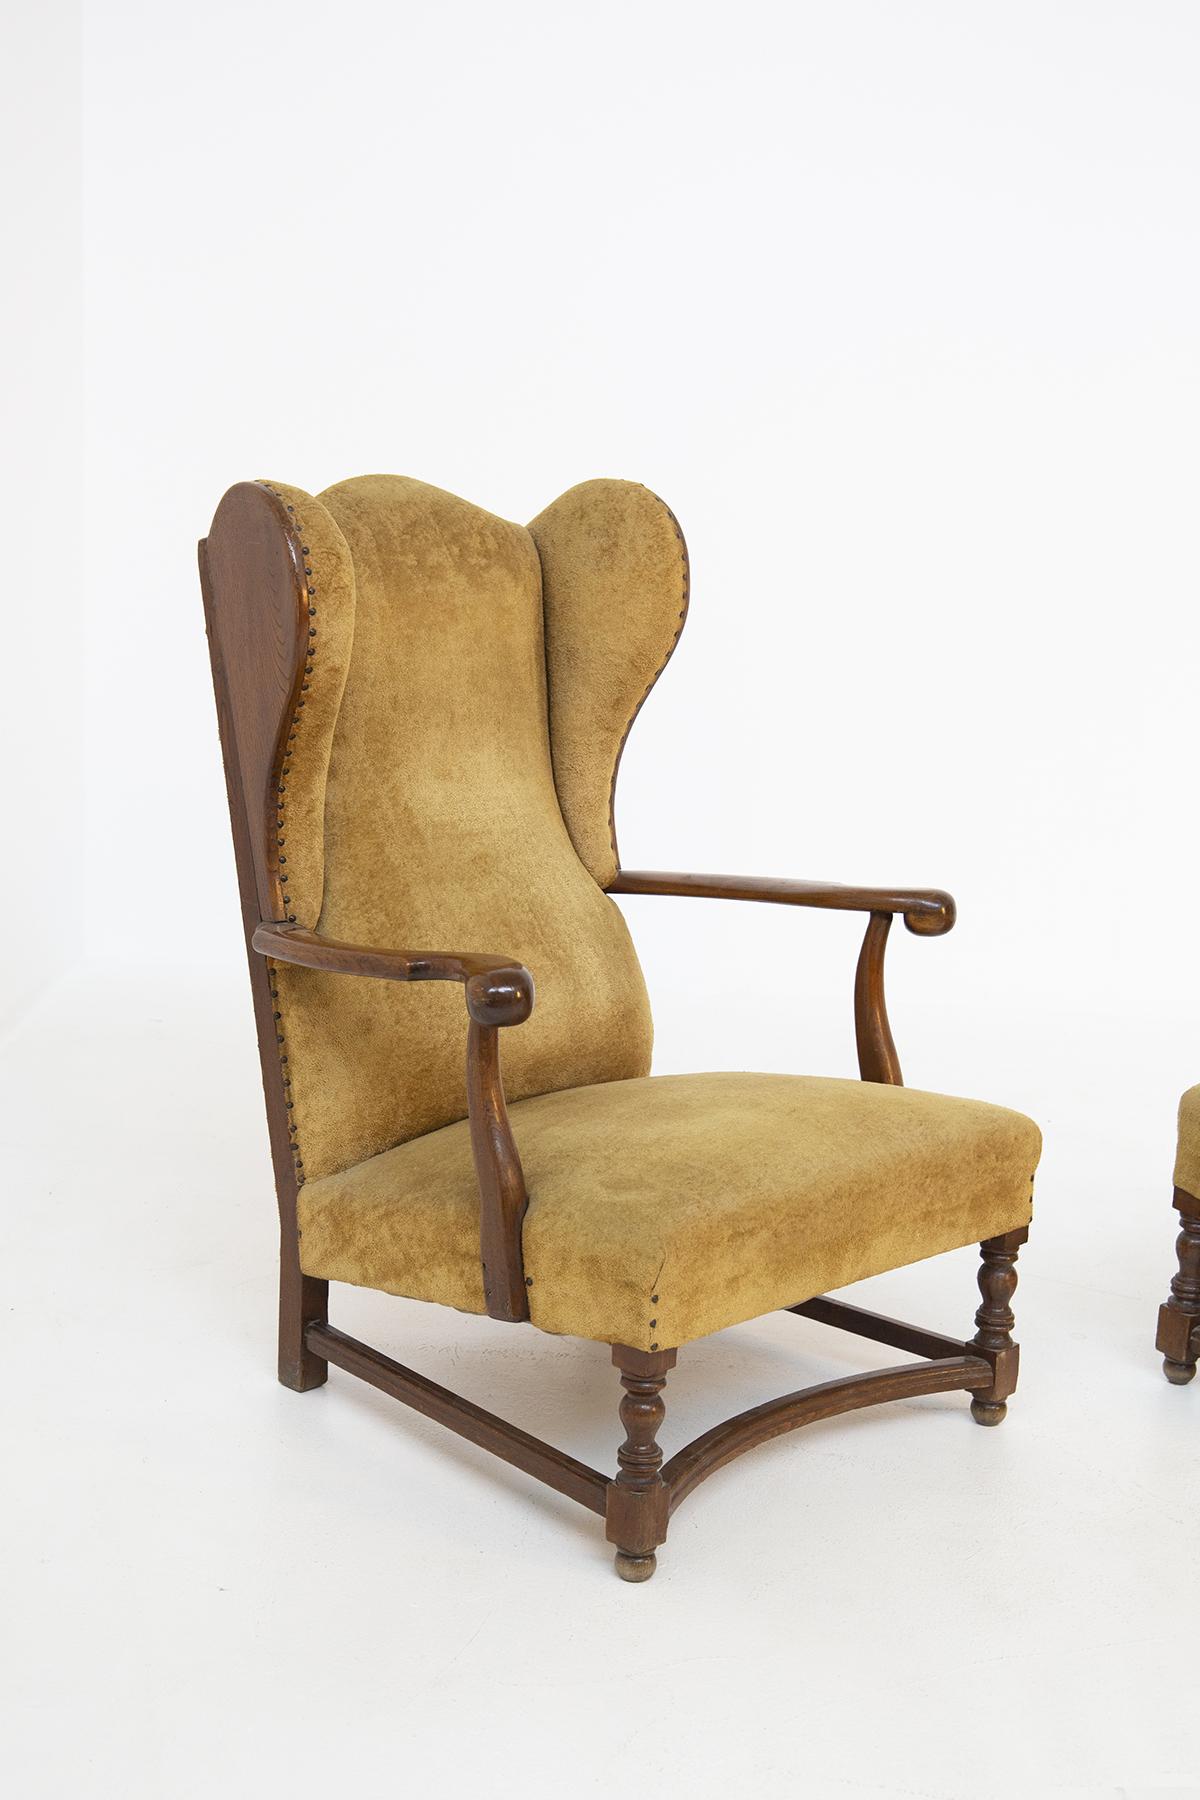 Gorgeous pair of velvet armchairs of English manufacture of the late 1800s.
The beautiful armchairs have a walnut wood structure and have been lined with sand colored velvet tending to yellow ocher.
Positioned in the high sides of the back we find